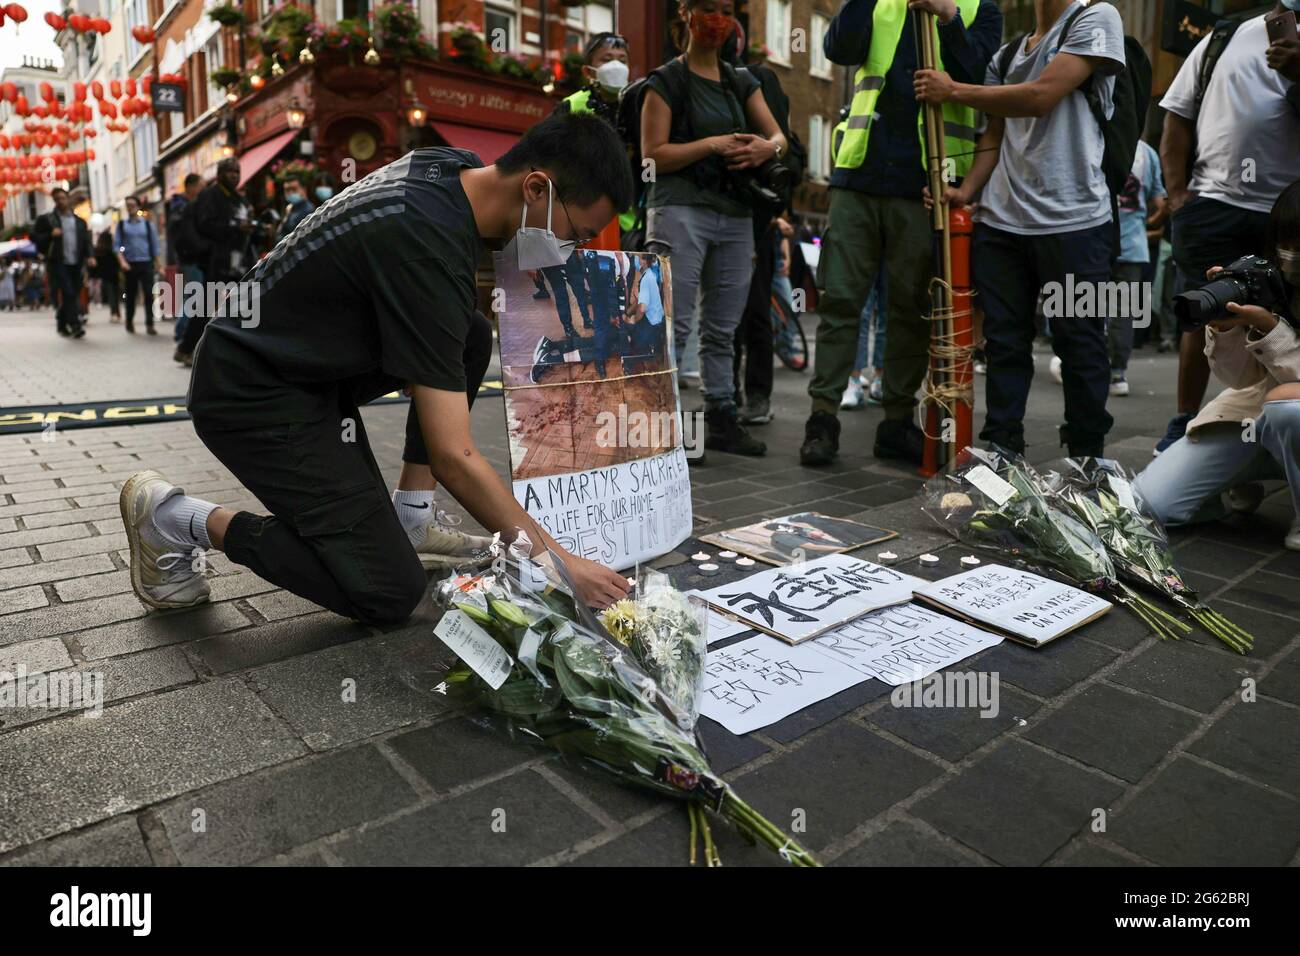 A protester places flowers and placards to mourn the death of a Hongkonger during the demonstration. Hongkongers held demonstrations in ten different cities in the UK to protest against the one year anniversary of the promulgation of the Hong Kong National Security Law and the Centennial anniversary of the Chinese Communist Party. In London, participants gathered outside the Chinese Embassy and marched to Chinatown where the main event took place. The crowds later moved to the Hong Kong Economic and Trade Office and set smoky flares outside as a symbolic sign of cursing the Hong Kong Governmen Stock Photo